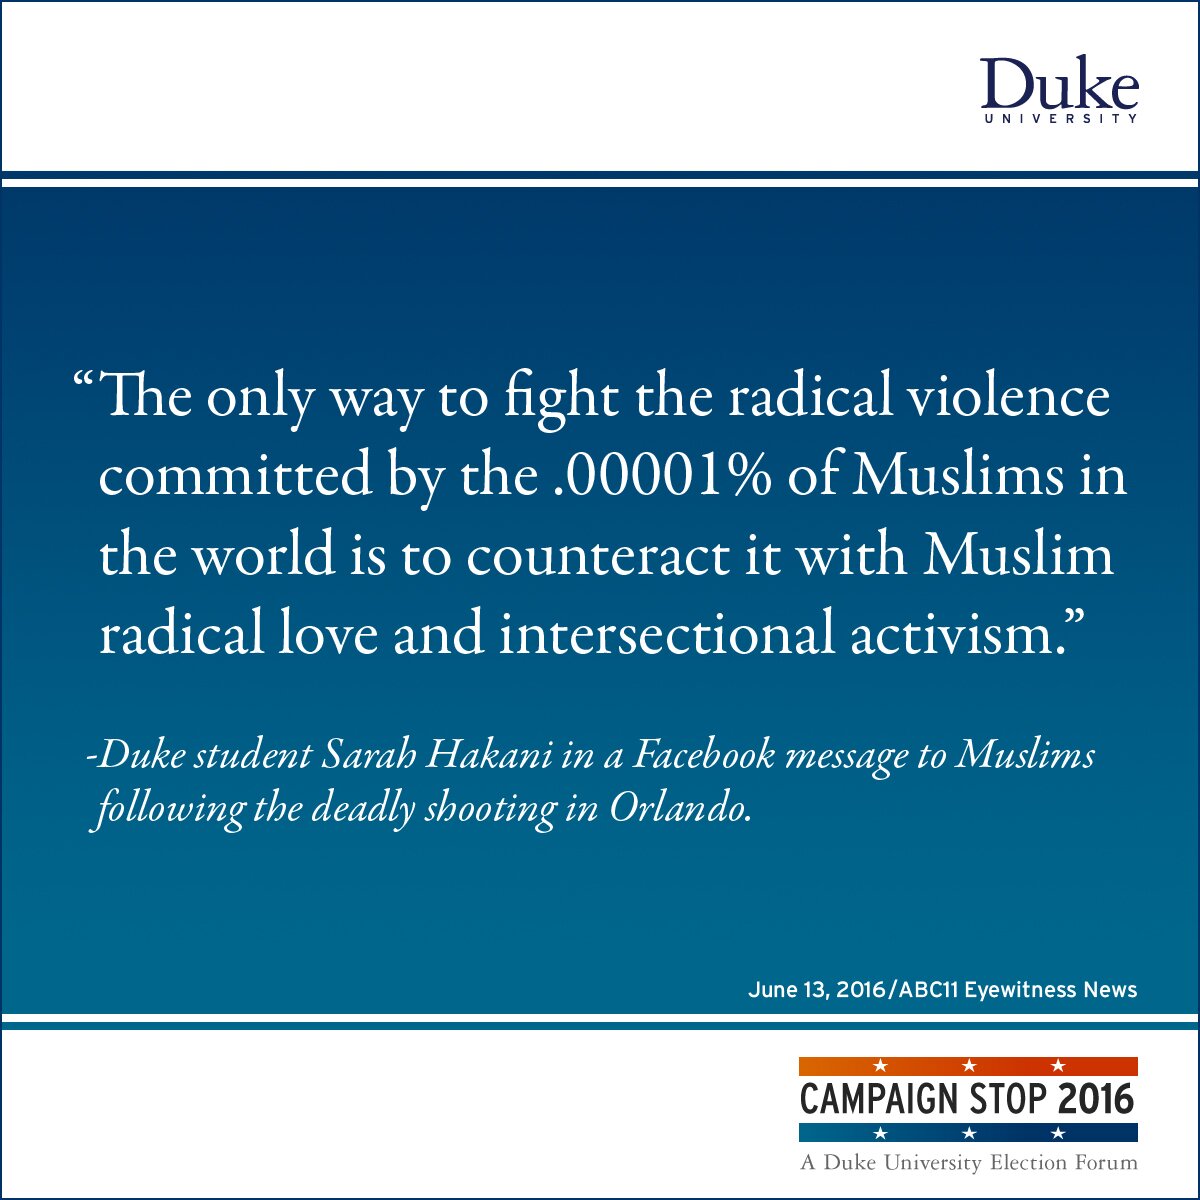 “The only way to fight the radical violence committed by the .00001% of Muslims in the world is to counteract it with Muslim radical love and intersectional activism.” -Duke student Sarah Hakani in a Facebook message to Muslims following the deadly shooting in Orlando.